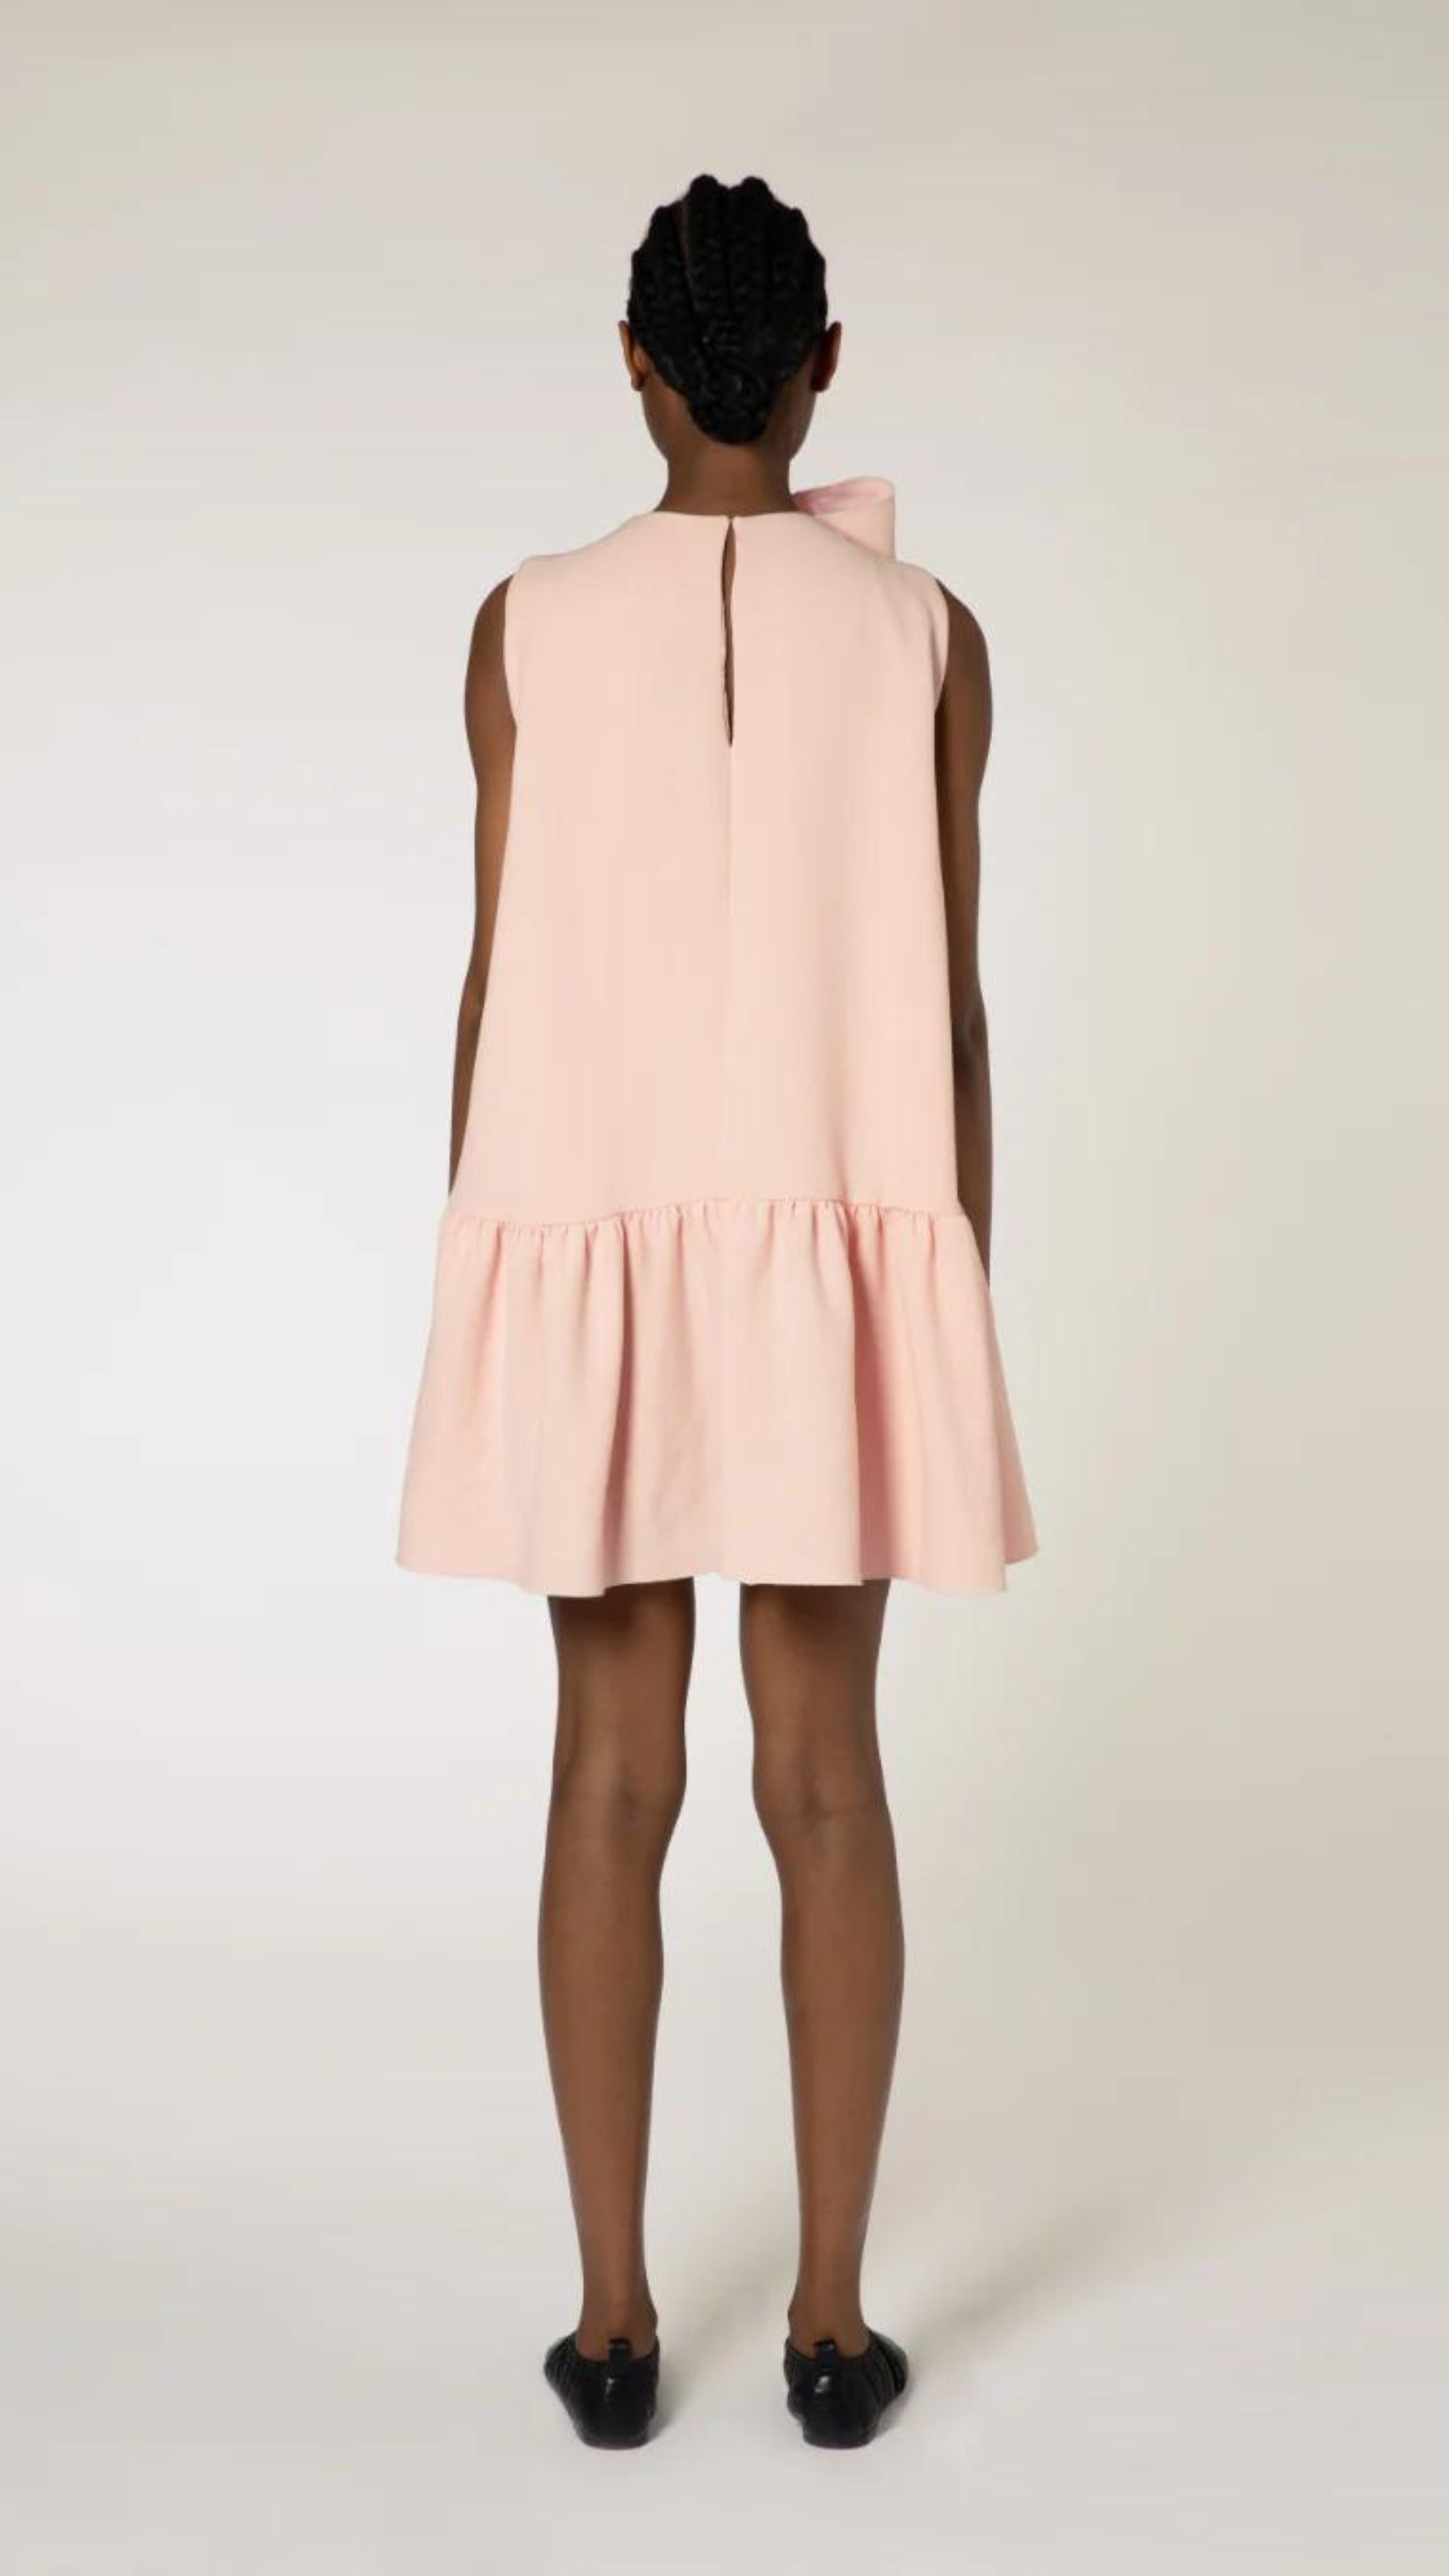 Roksanda Rosalina Dress. Soft pink with fun oversize twisted bow at neckline. Mini dress length with a dropped waist and pleated skirt panel. Shown on model facing the back.